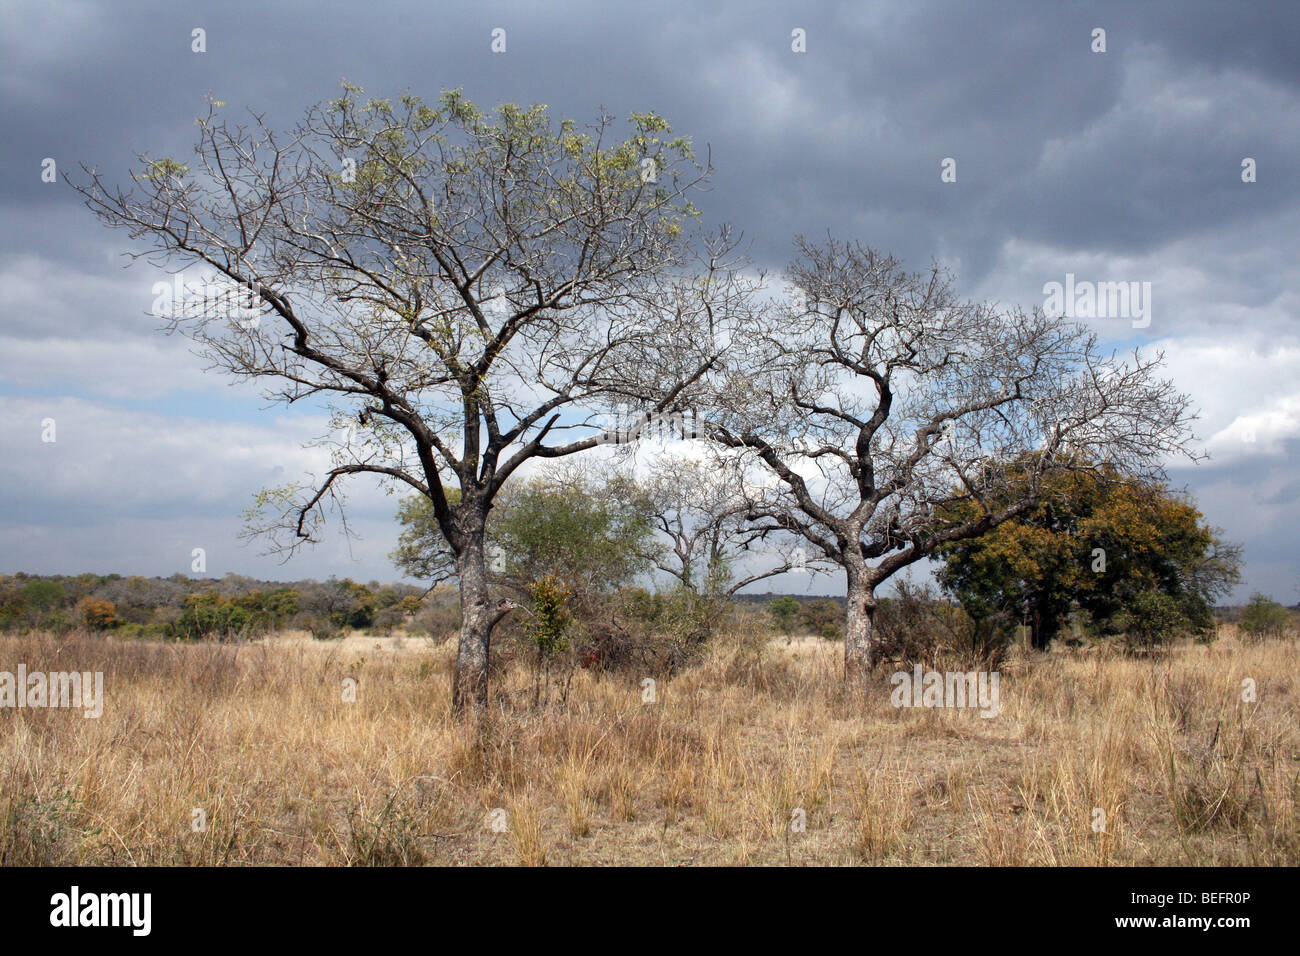 Storm Cloud Gather Behind Acacia Trees In The Kruger National Park, South Africa Stock Photo